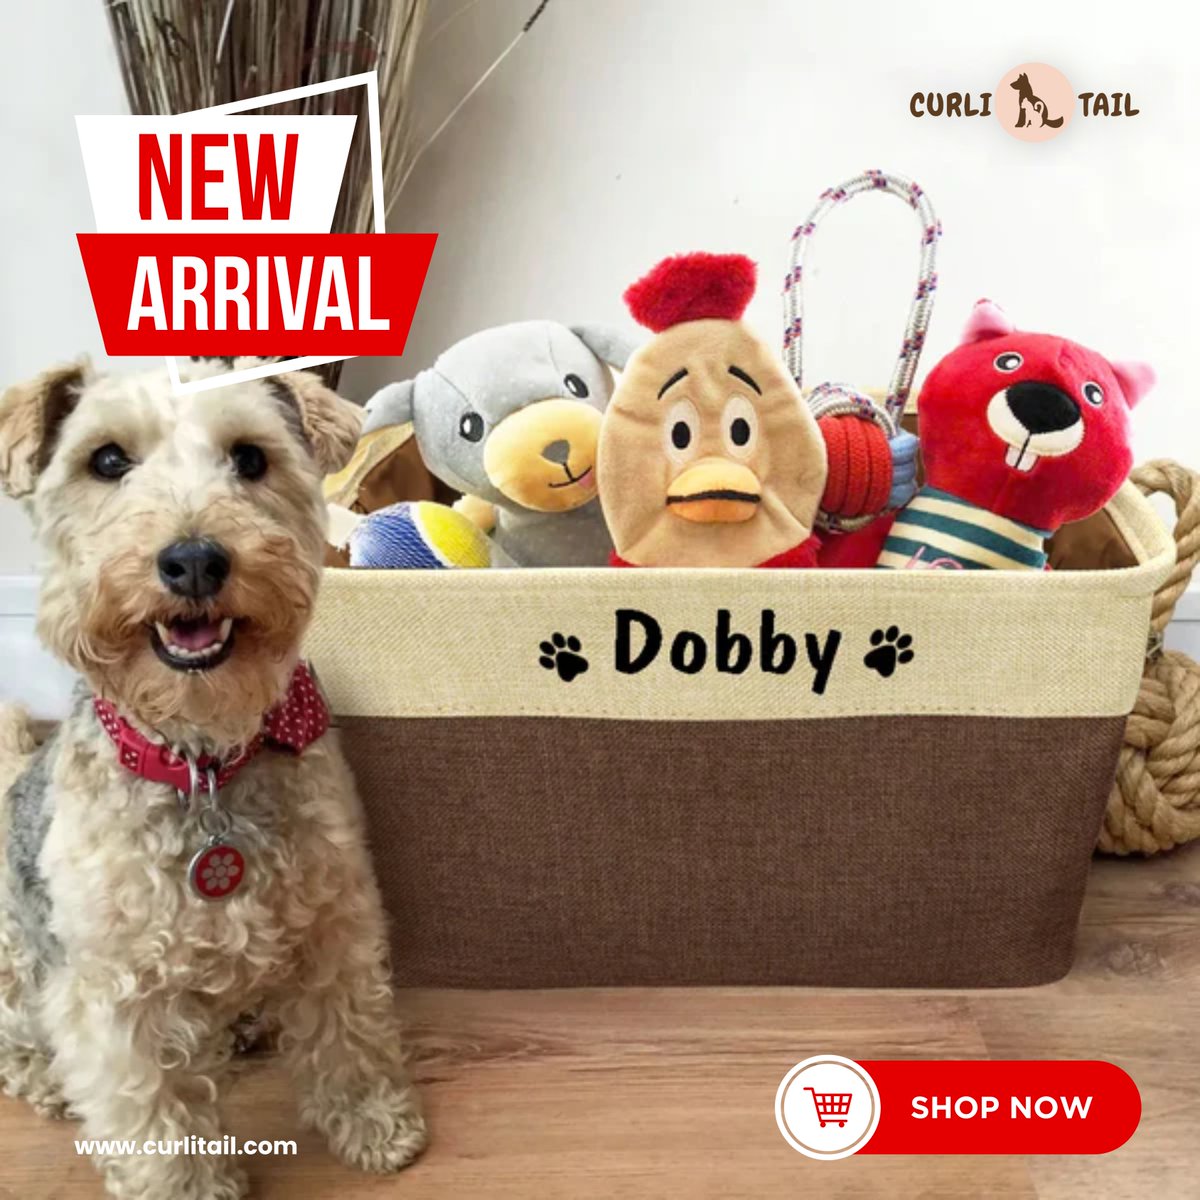 🌱 Introducing Our Eco Personalized Toy Basket!Key features:
🌿 Environmentally Friendly
🧸 Personalized Touch
🌈 Variety of Styles
♻️ Sustainable Storage
 our Eco Personalized Toy Basket! 🌟 
 curlitail.com/collections/gi… 
#EcoFriendlyLiving #PersonalizedToys #SustainableDesign